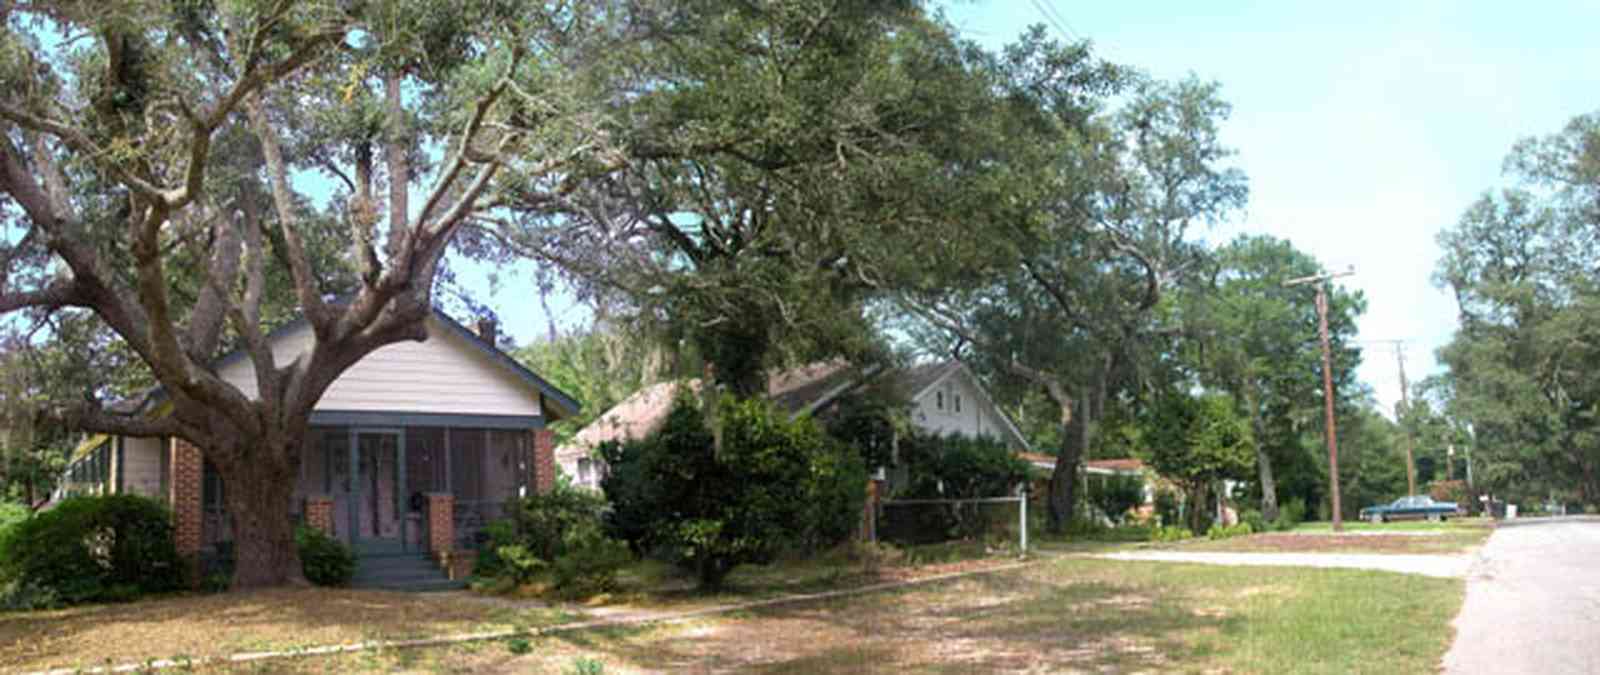 East-Pensacola-Heights:-2900-Jackson-Street_01.jpg:  craftsman cottage, oak tree, spanish moss, chain link fence, front porch